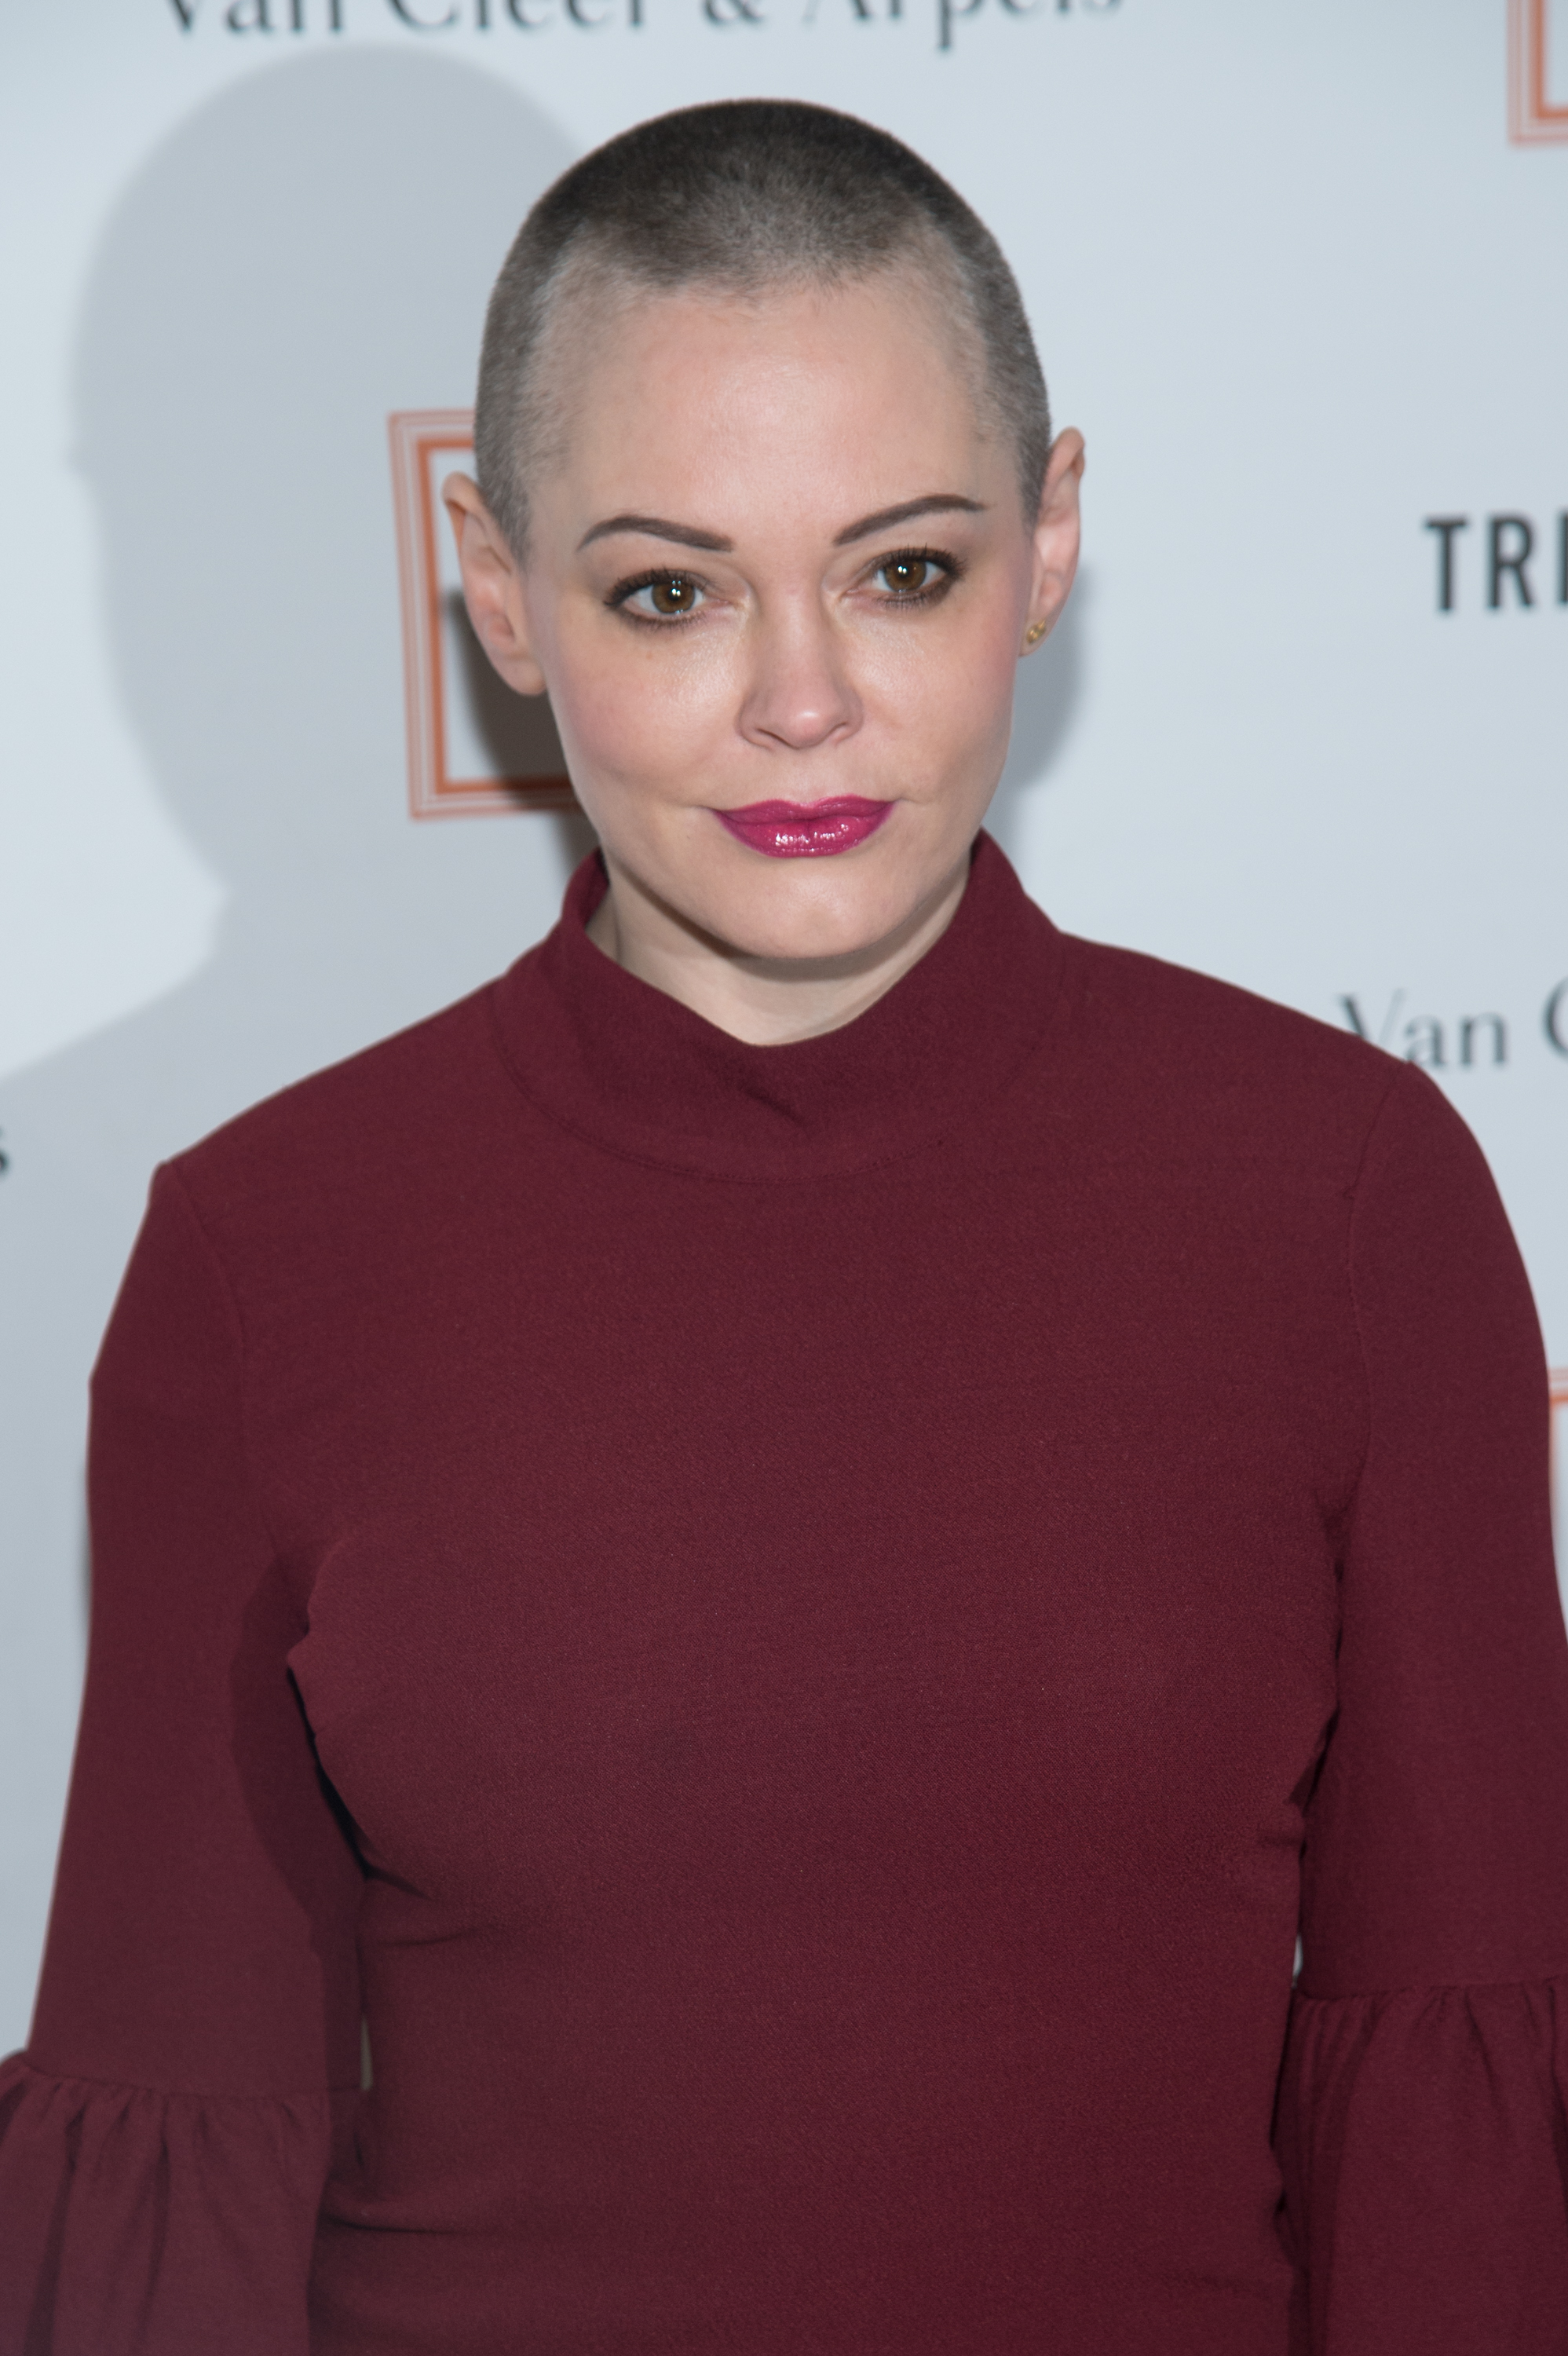 Actress Rose McGowan attends the New York Academy of Art's Tribeca Ball 2016 at the NY Academy of Art in New York City on April 4, 2016.